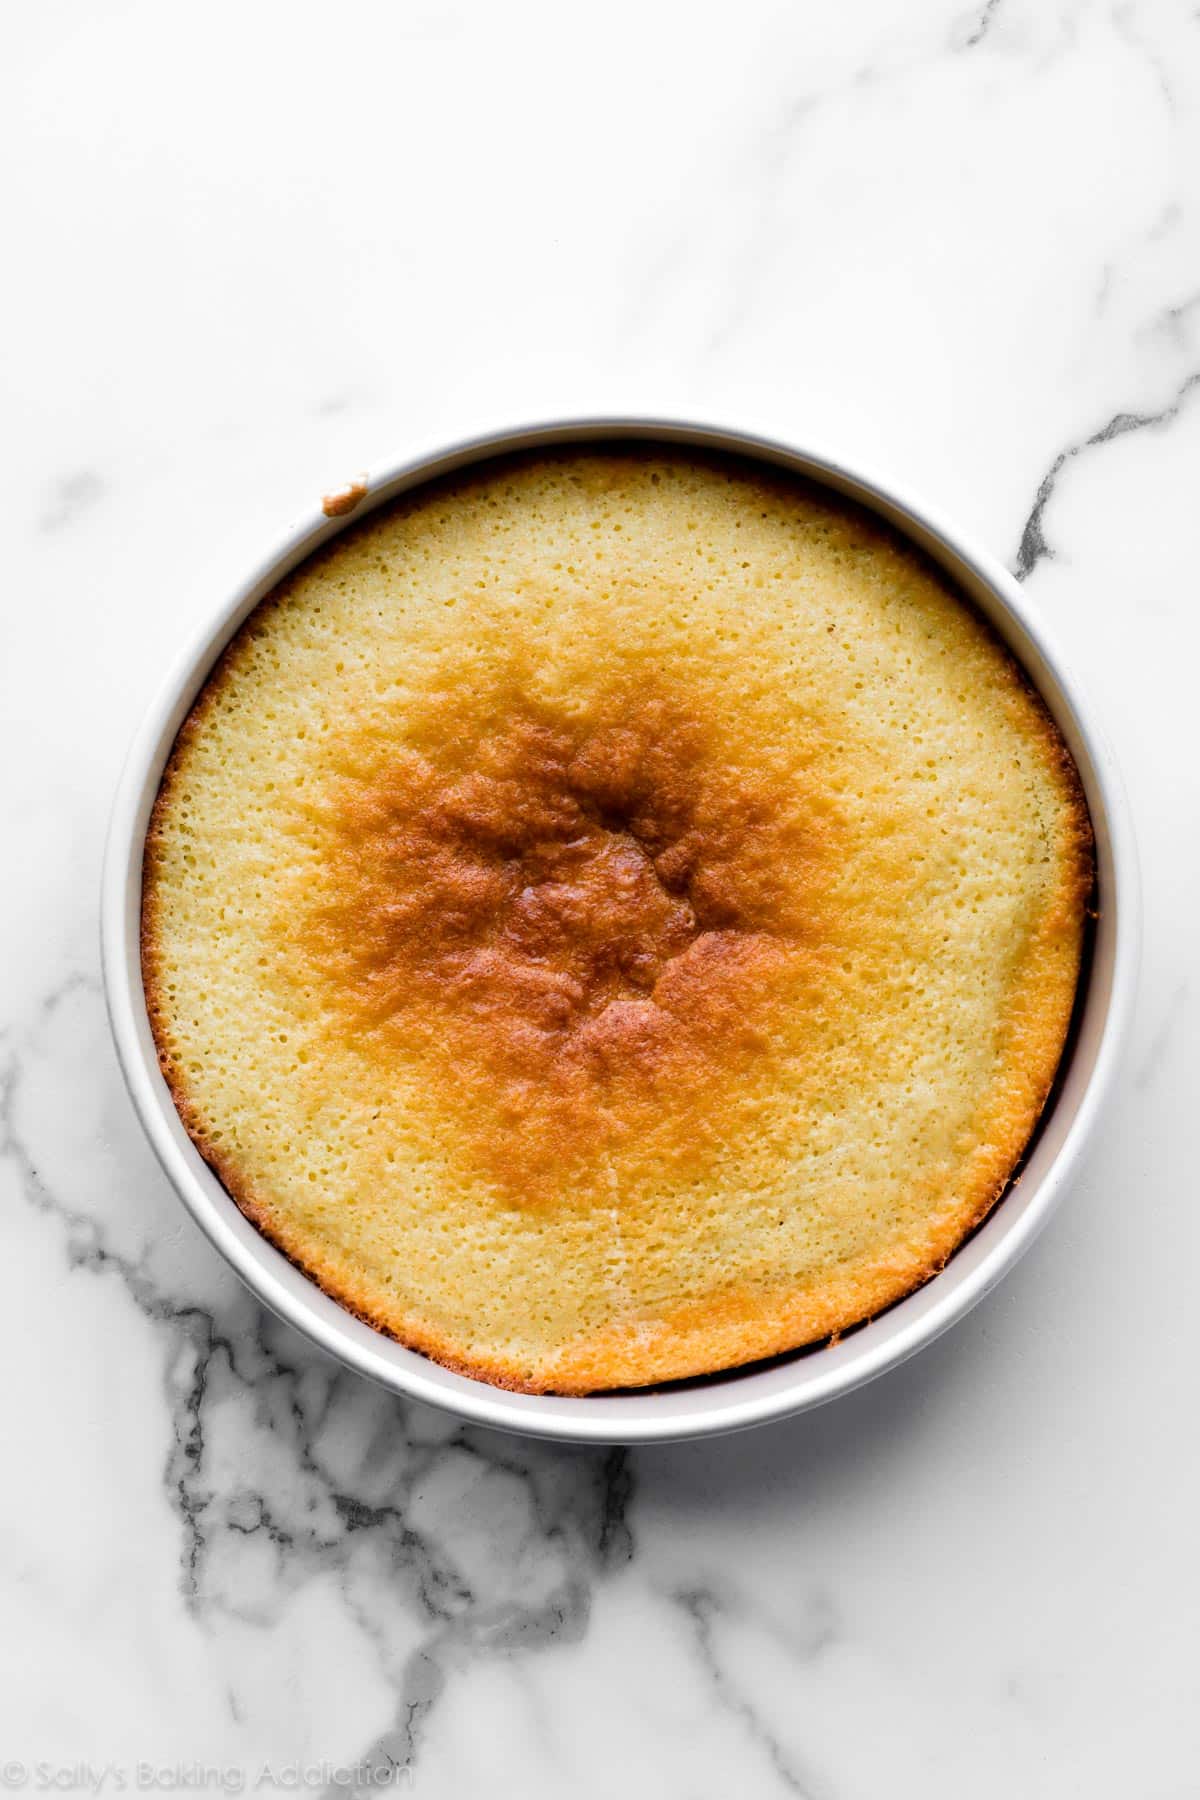 overcooked yellow cake in a 9 inch cake pan